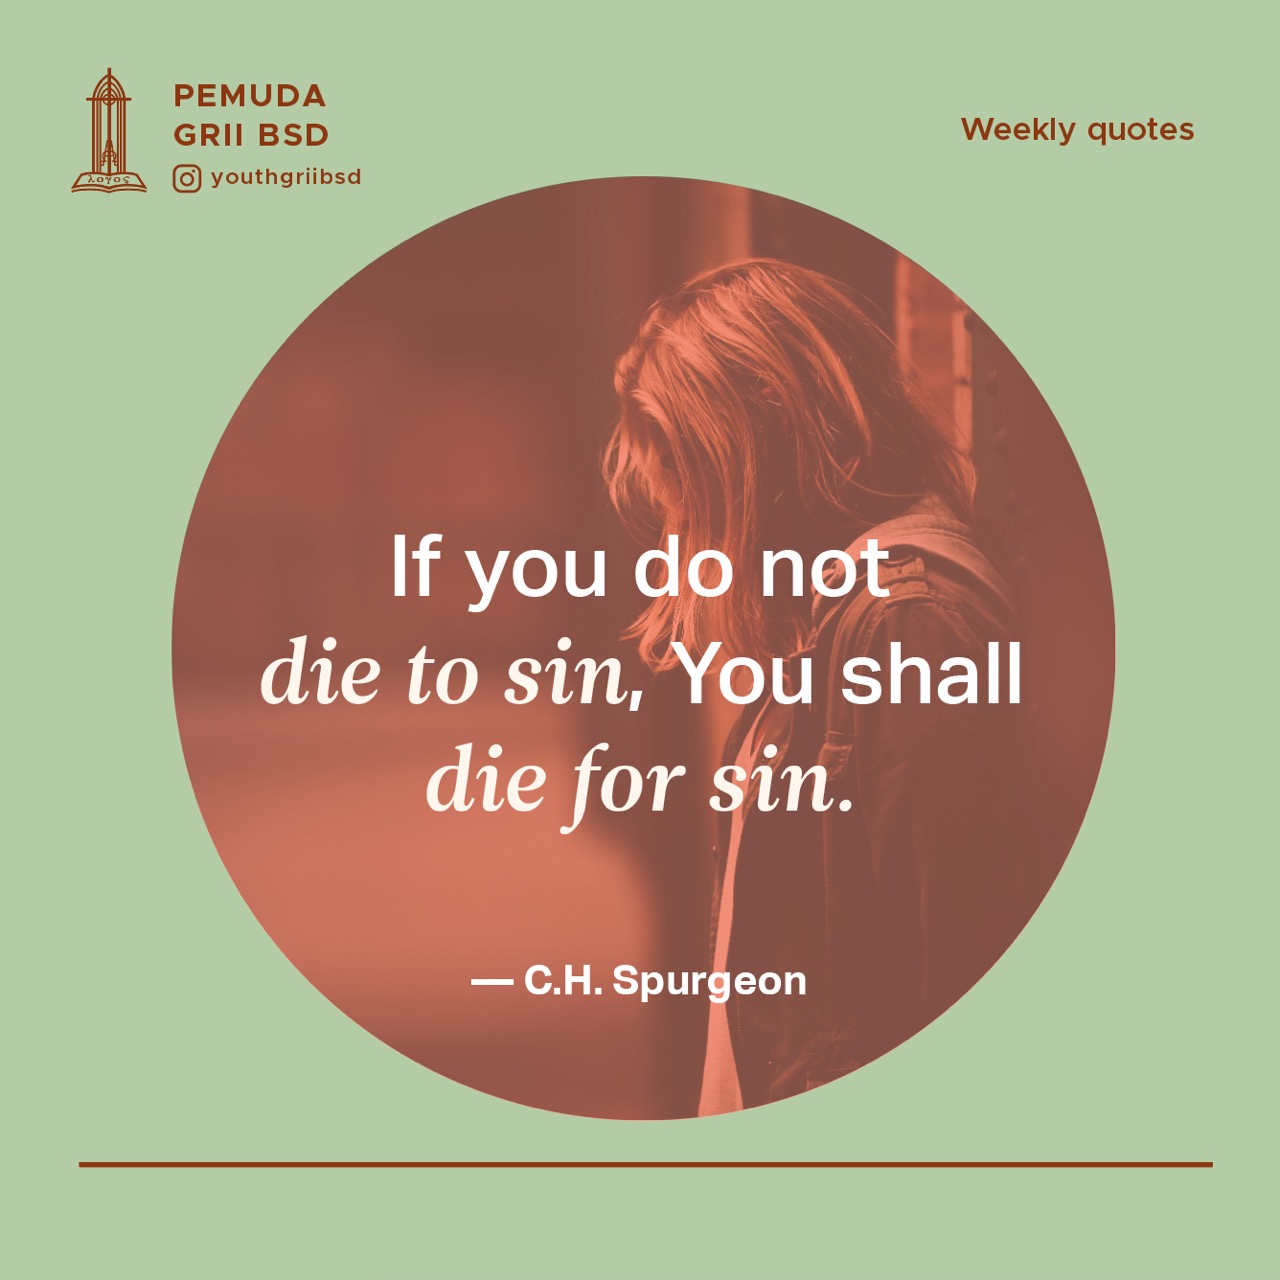 If you do not die to sin, You shall die for sin.